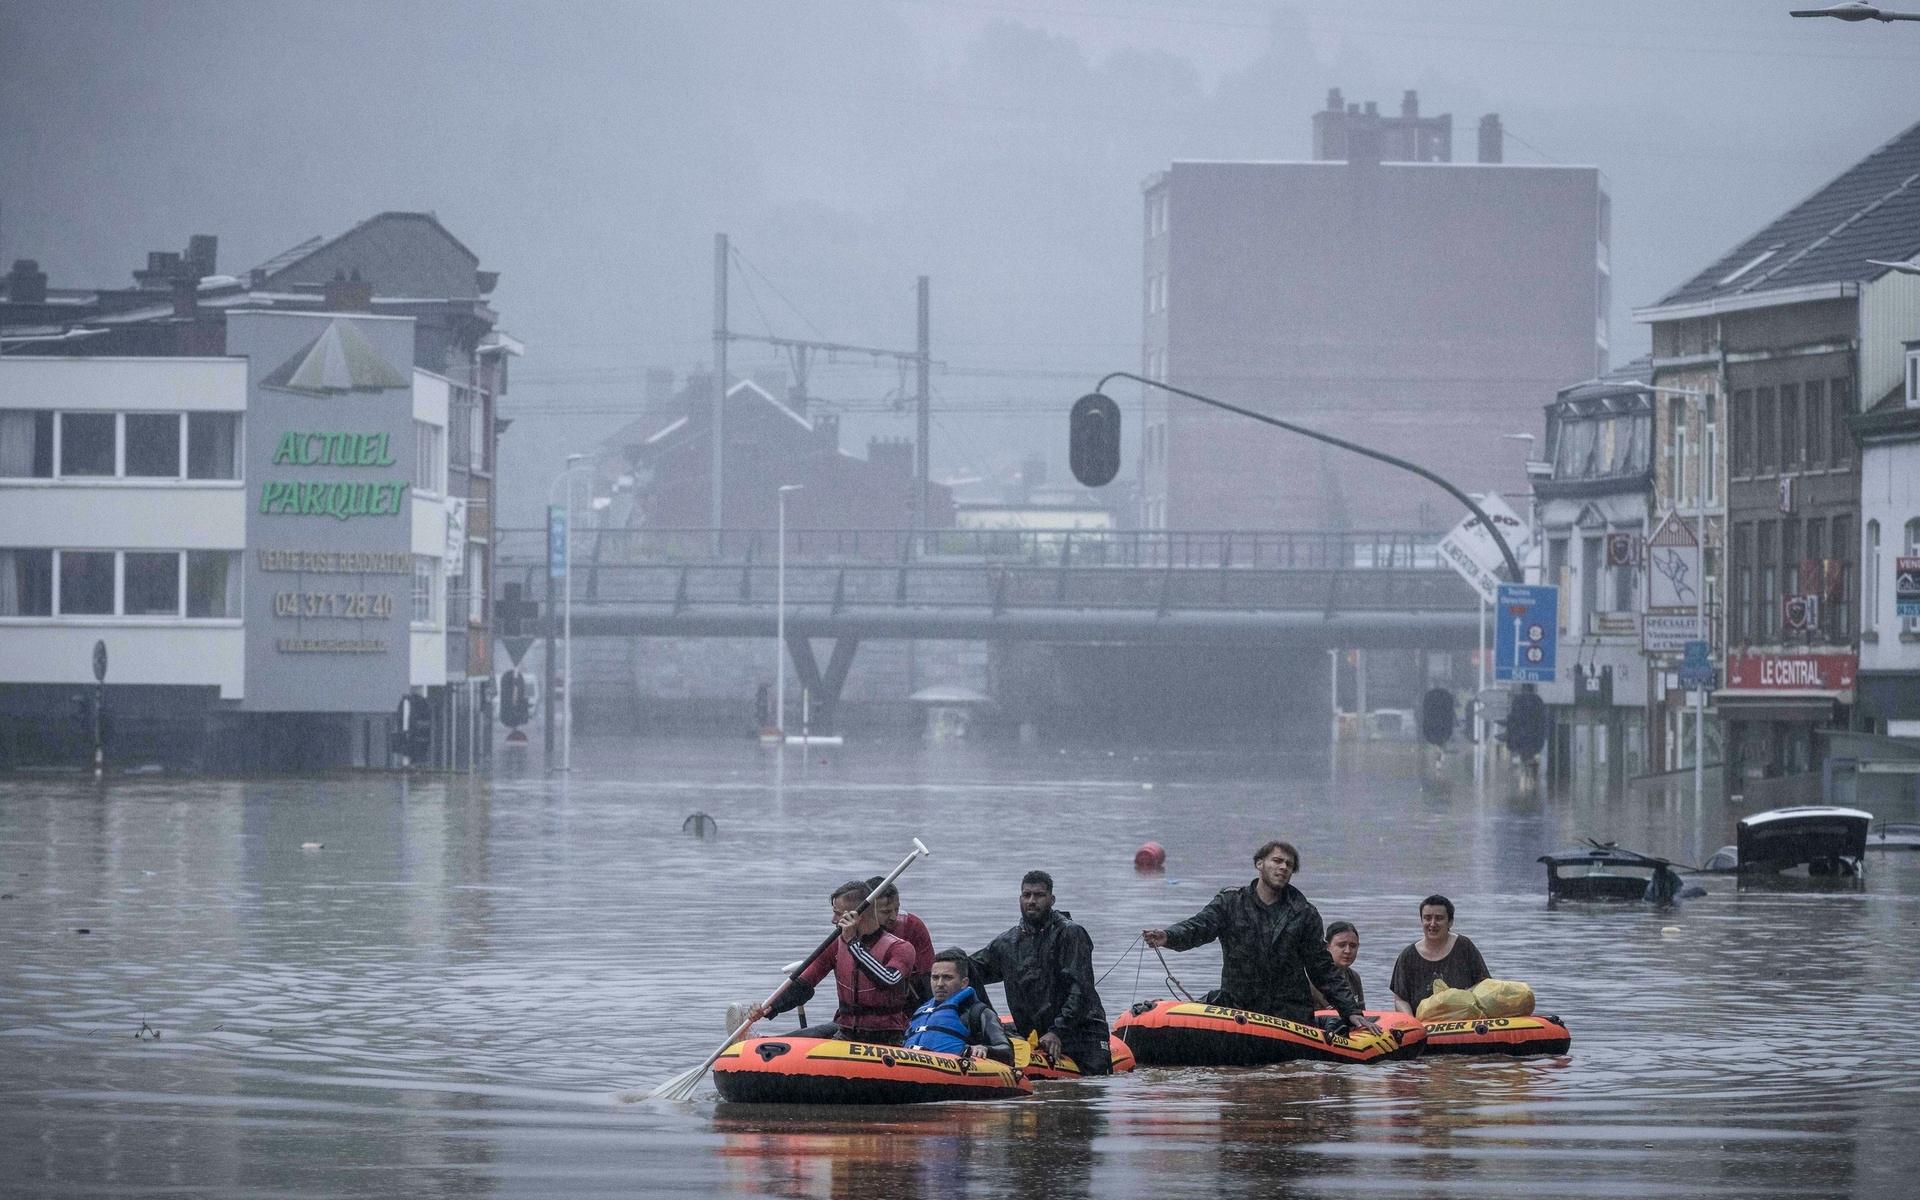 People use rubber rafts in floodwaters after the Meuse River broke its banks during heavy flooding in Liege, Belgium, Thursday, July 15, 2021. Heavy rainfall is causing flooding in several provinces in Belgium with rain expected to last until Friday. (AP Photo/Valentin Bianchi)  VLM159